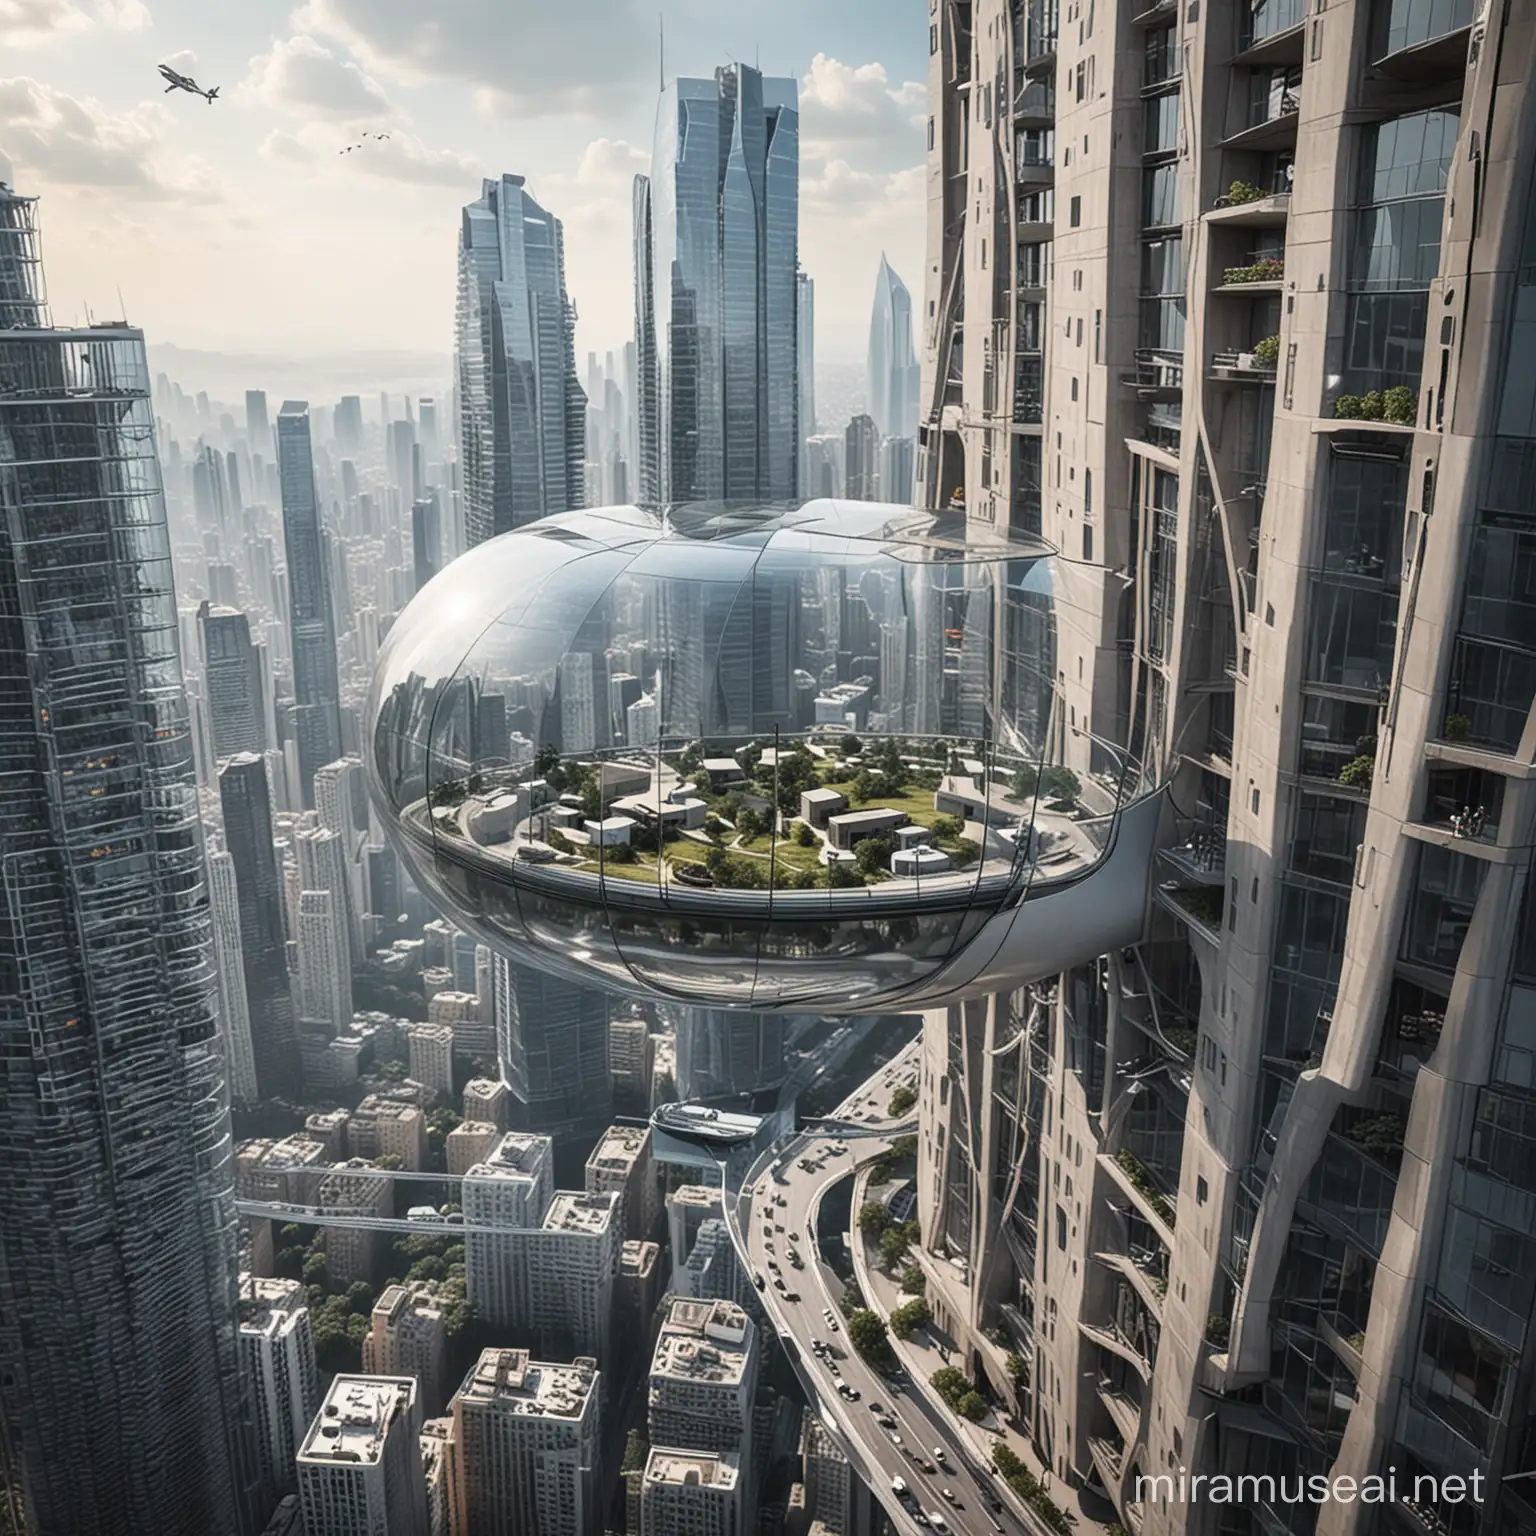 curate a capsule shaped skybridge, connecting tall buildings of height 1 kilometer, in the year 2124, glass material